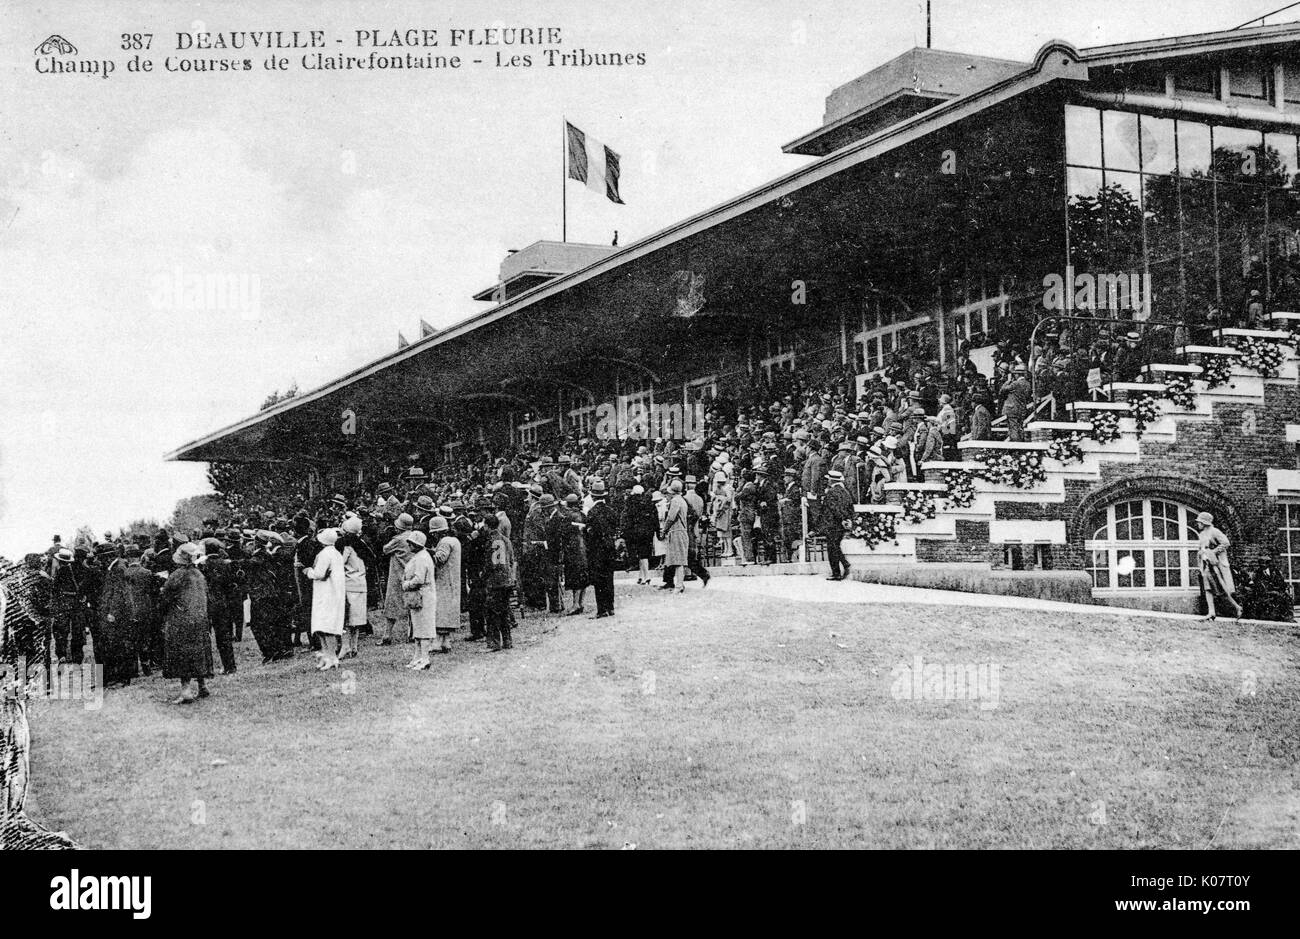 Deauville racecourse with crowd, France Stock Photo